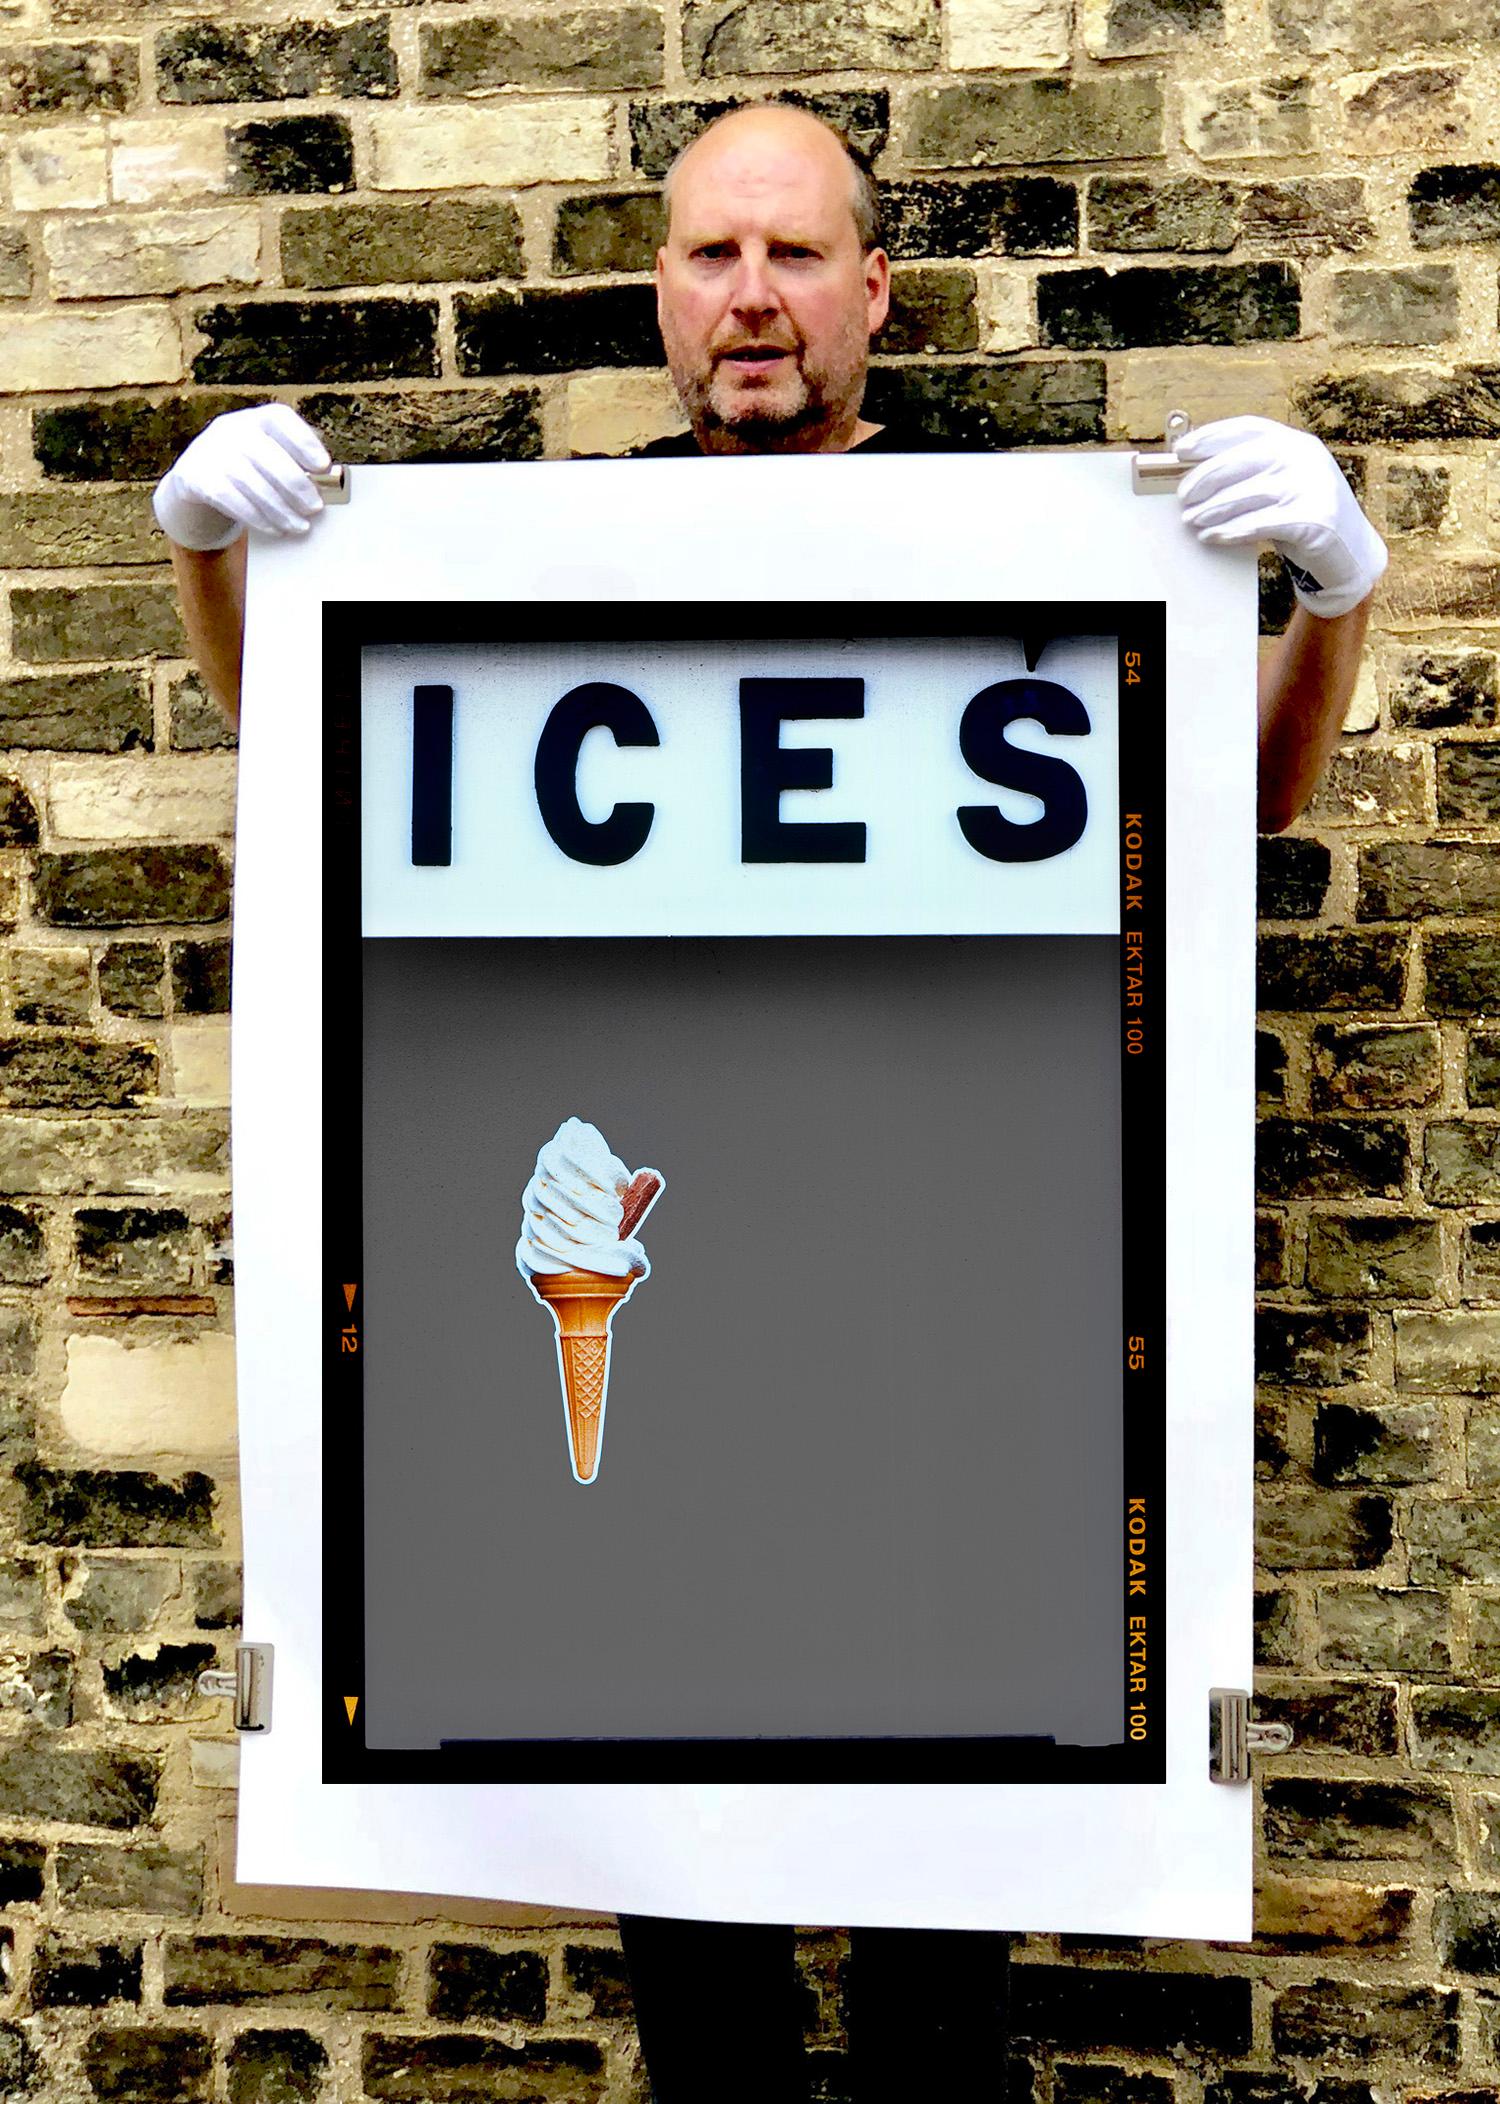 Ices (Grey), Bexhill-on-Sea - British seaside color photography - Photograph by Richard Heeps